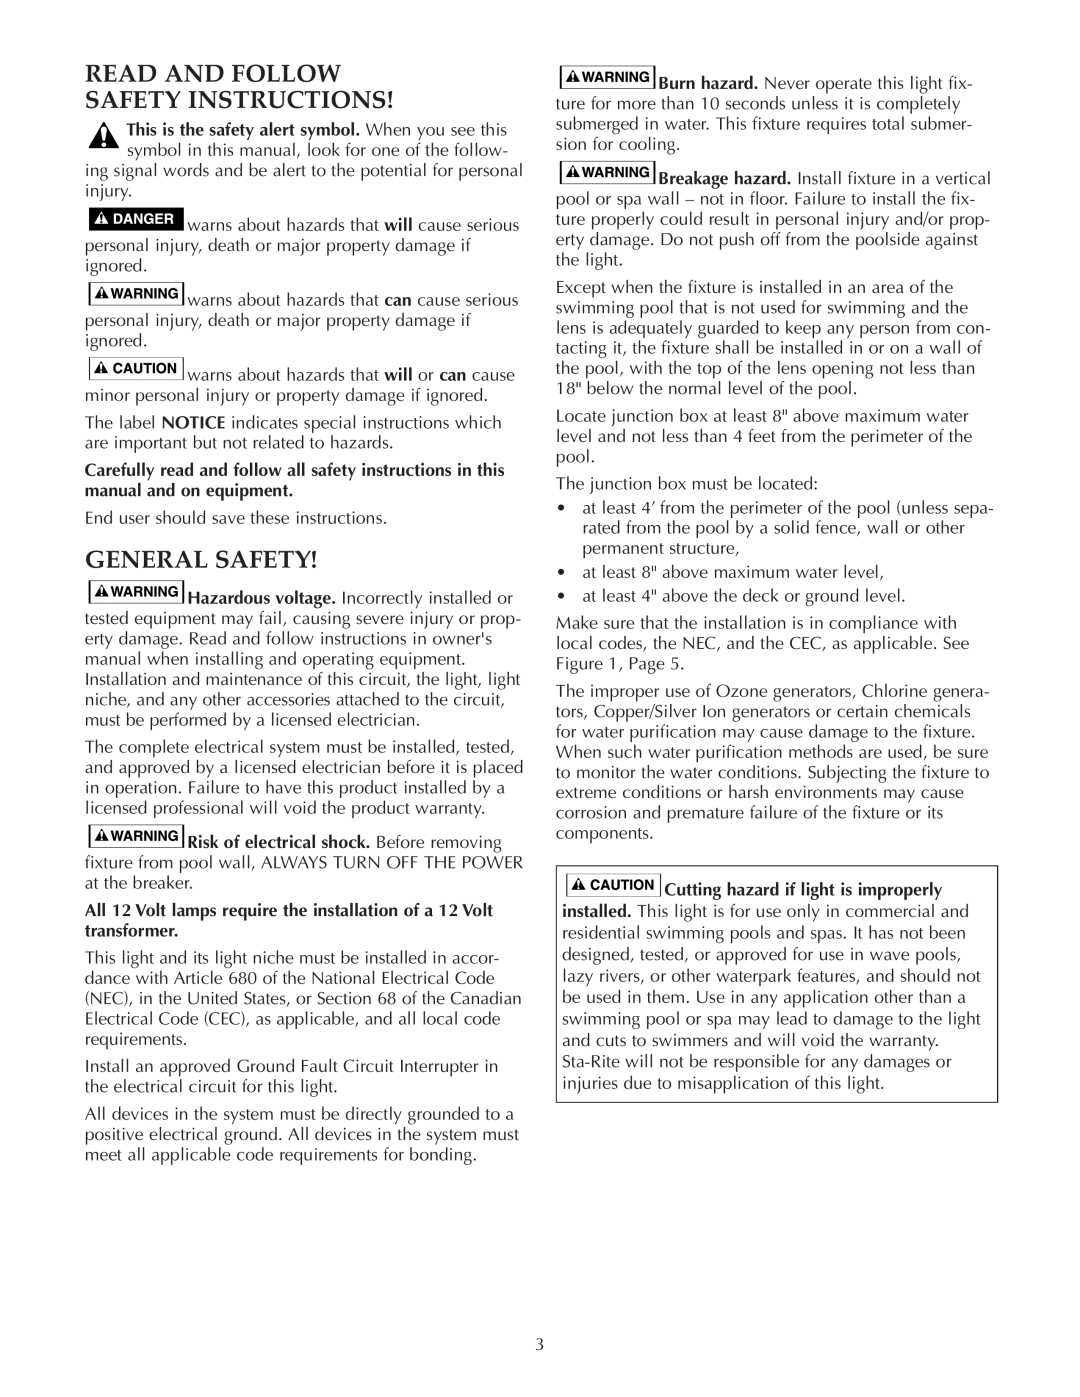 Pentair SunLite LTC owner manual Read And Follow Safety Instructions, General Safety 